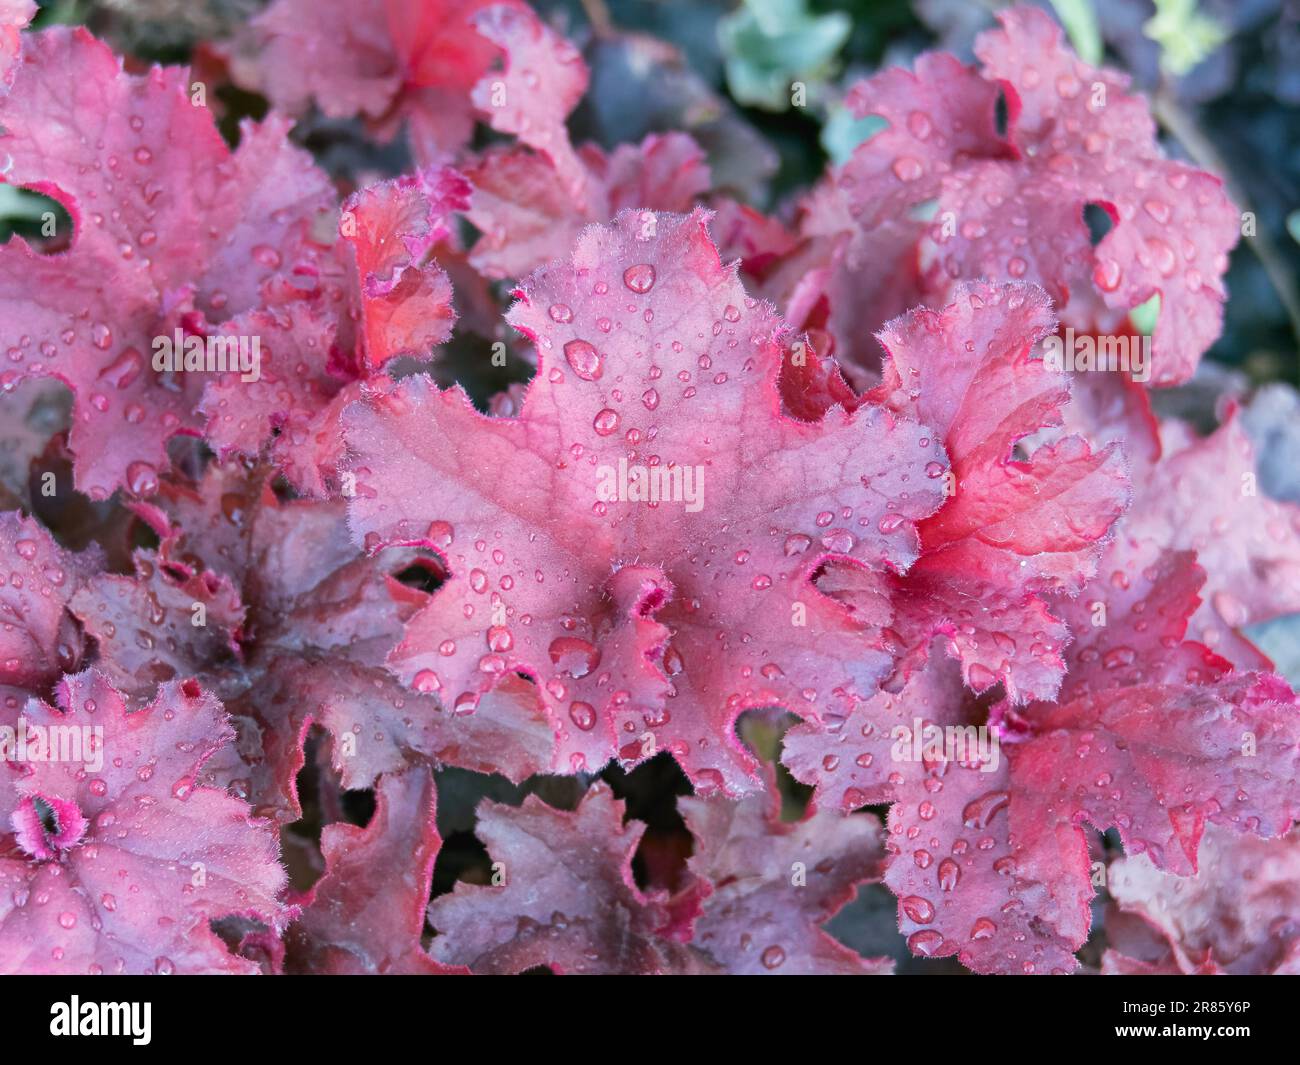 heuchera purple leaves with raindrops view from above outdoor Stock Photo